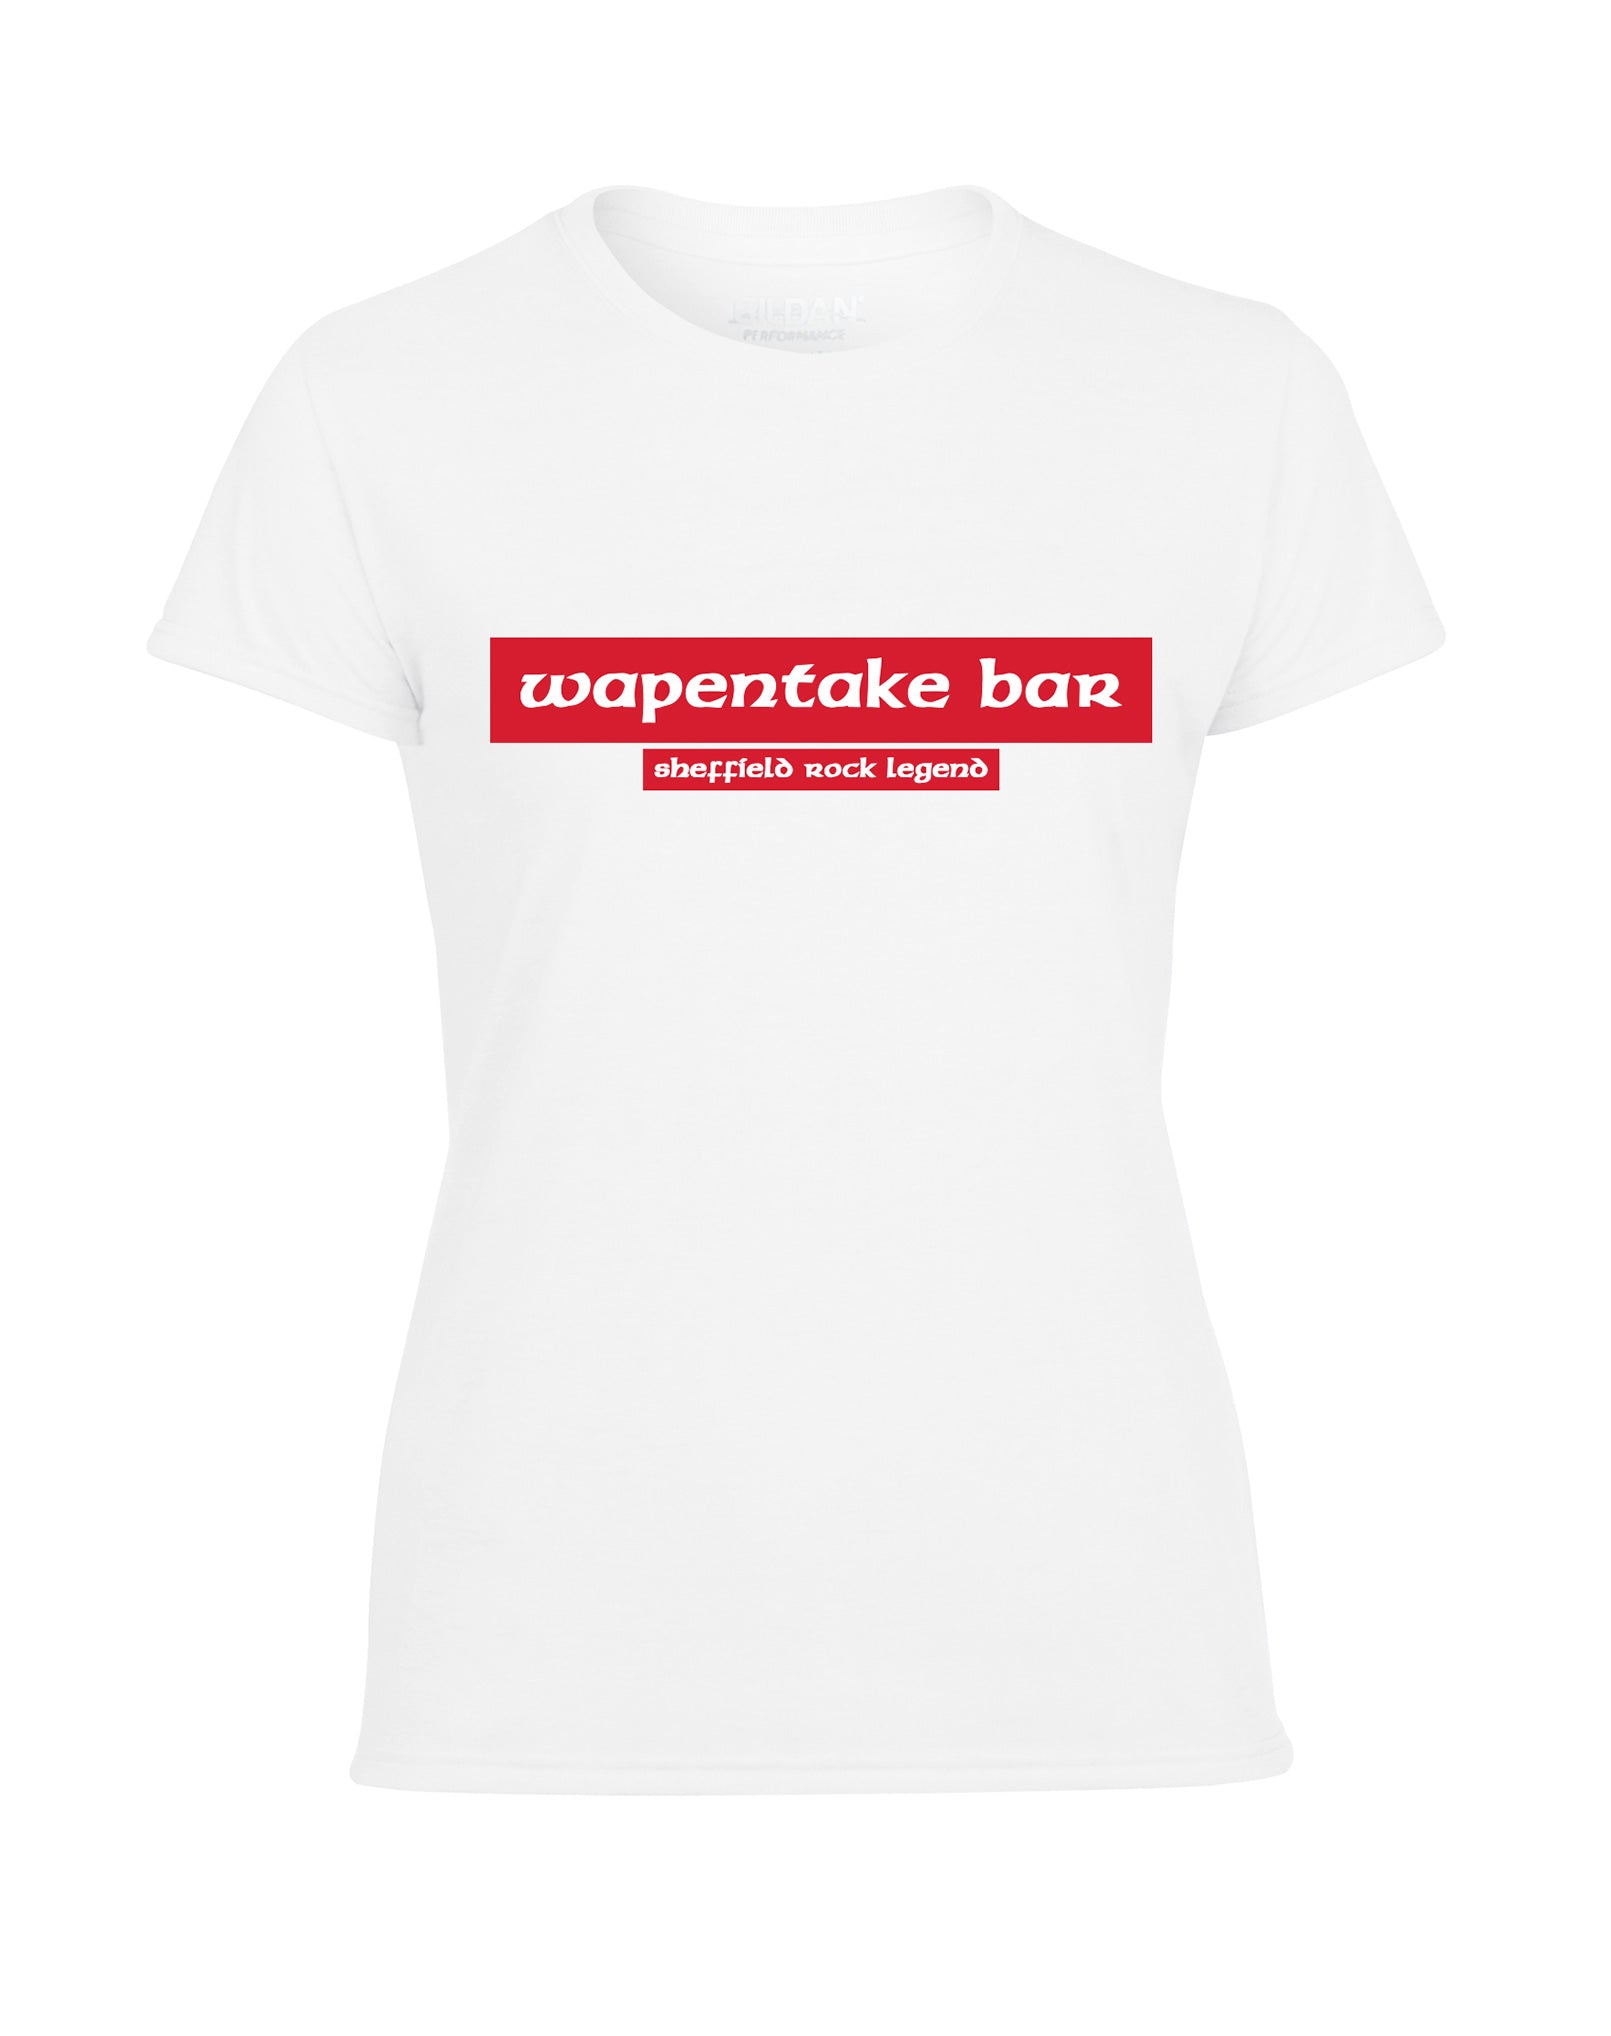 Wapentake Sign ladies fit T-shirt - various colours - Dirty Stop Outs